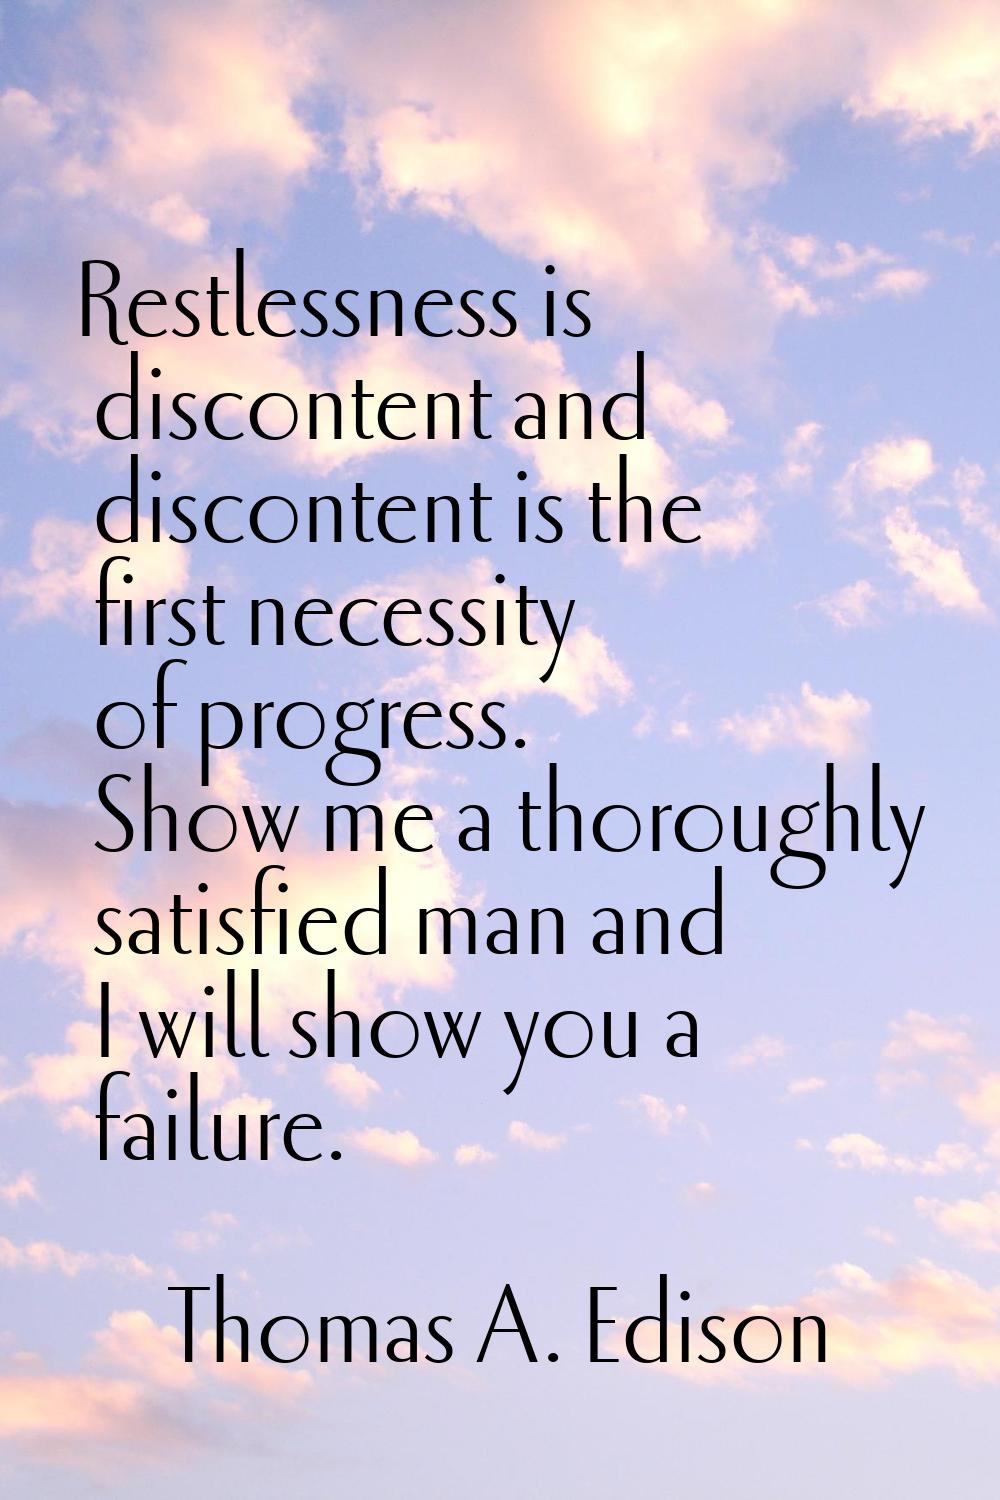 Restlessness is discontent and discontent is the first necessity of progress. Show me a thoroughly 